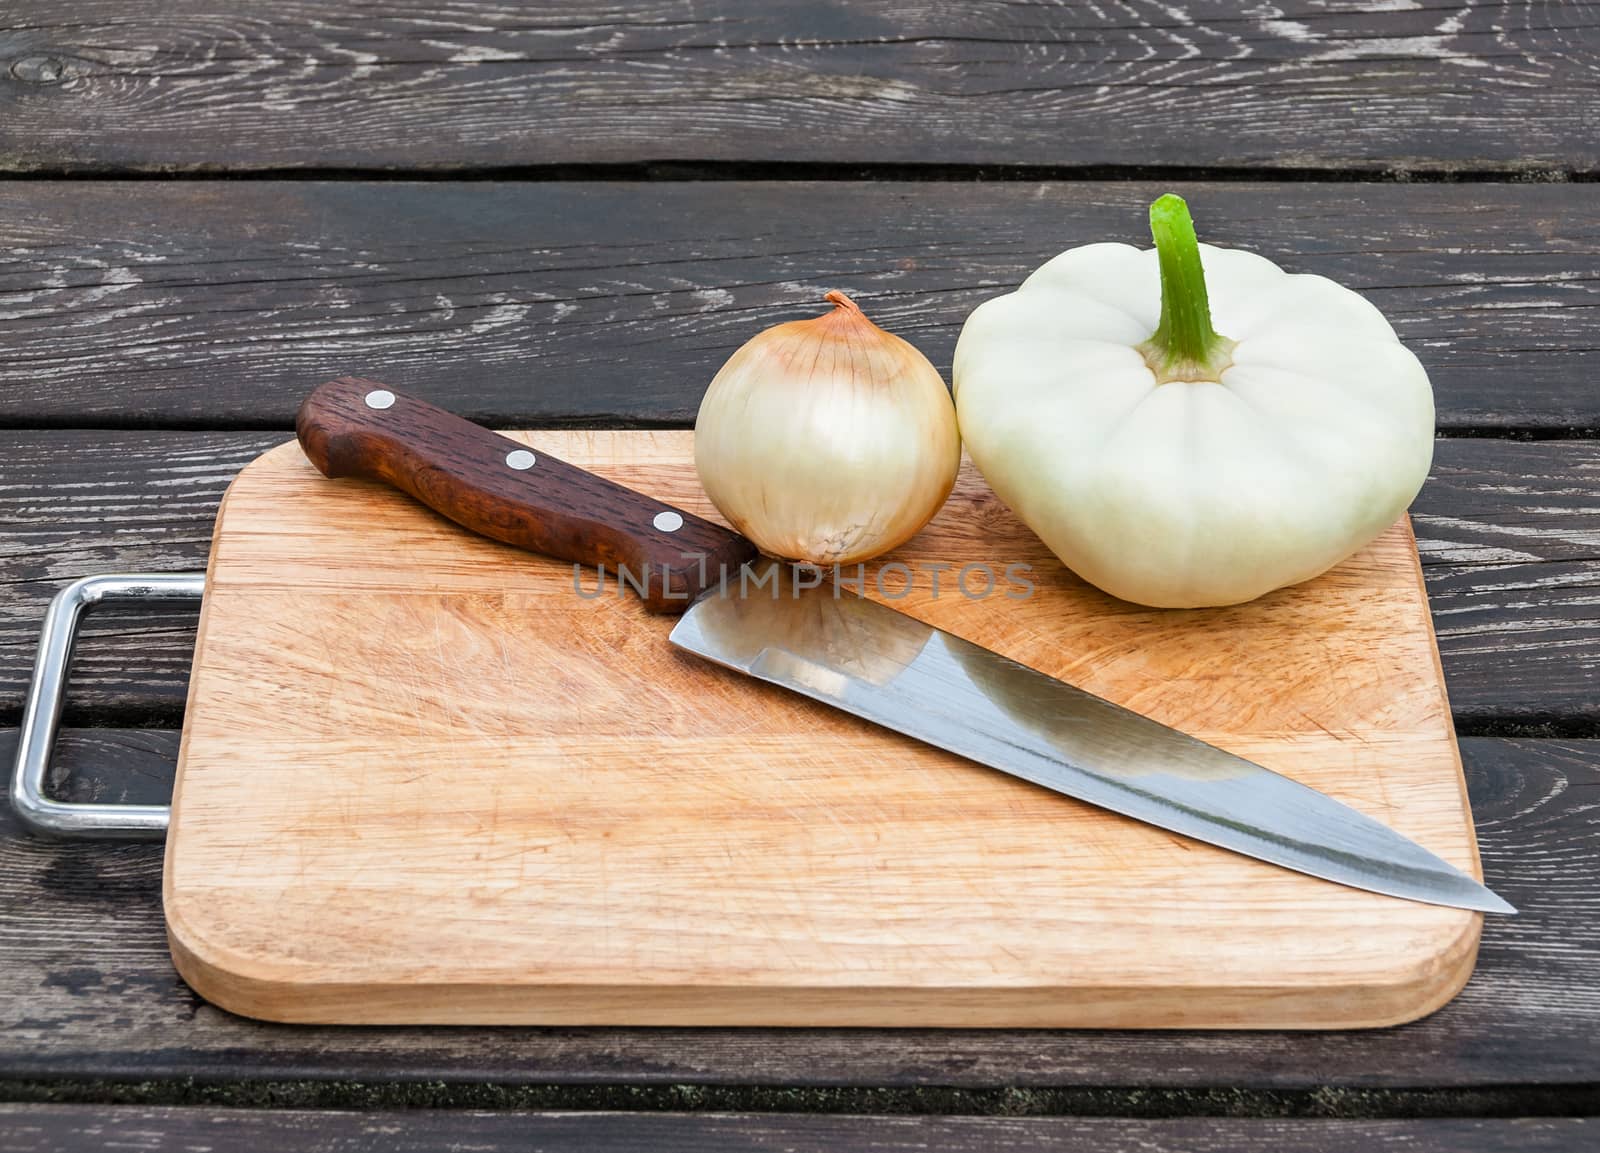 Onions, squash and knife on board by zeffss